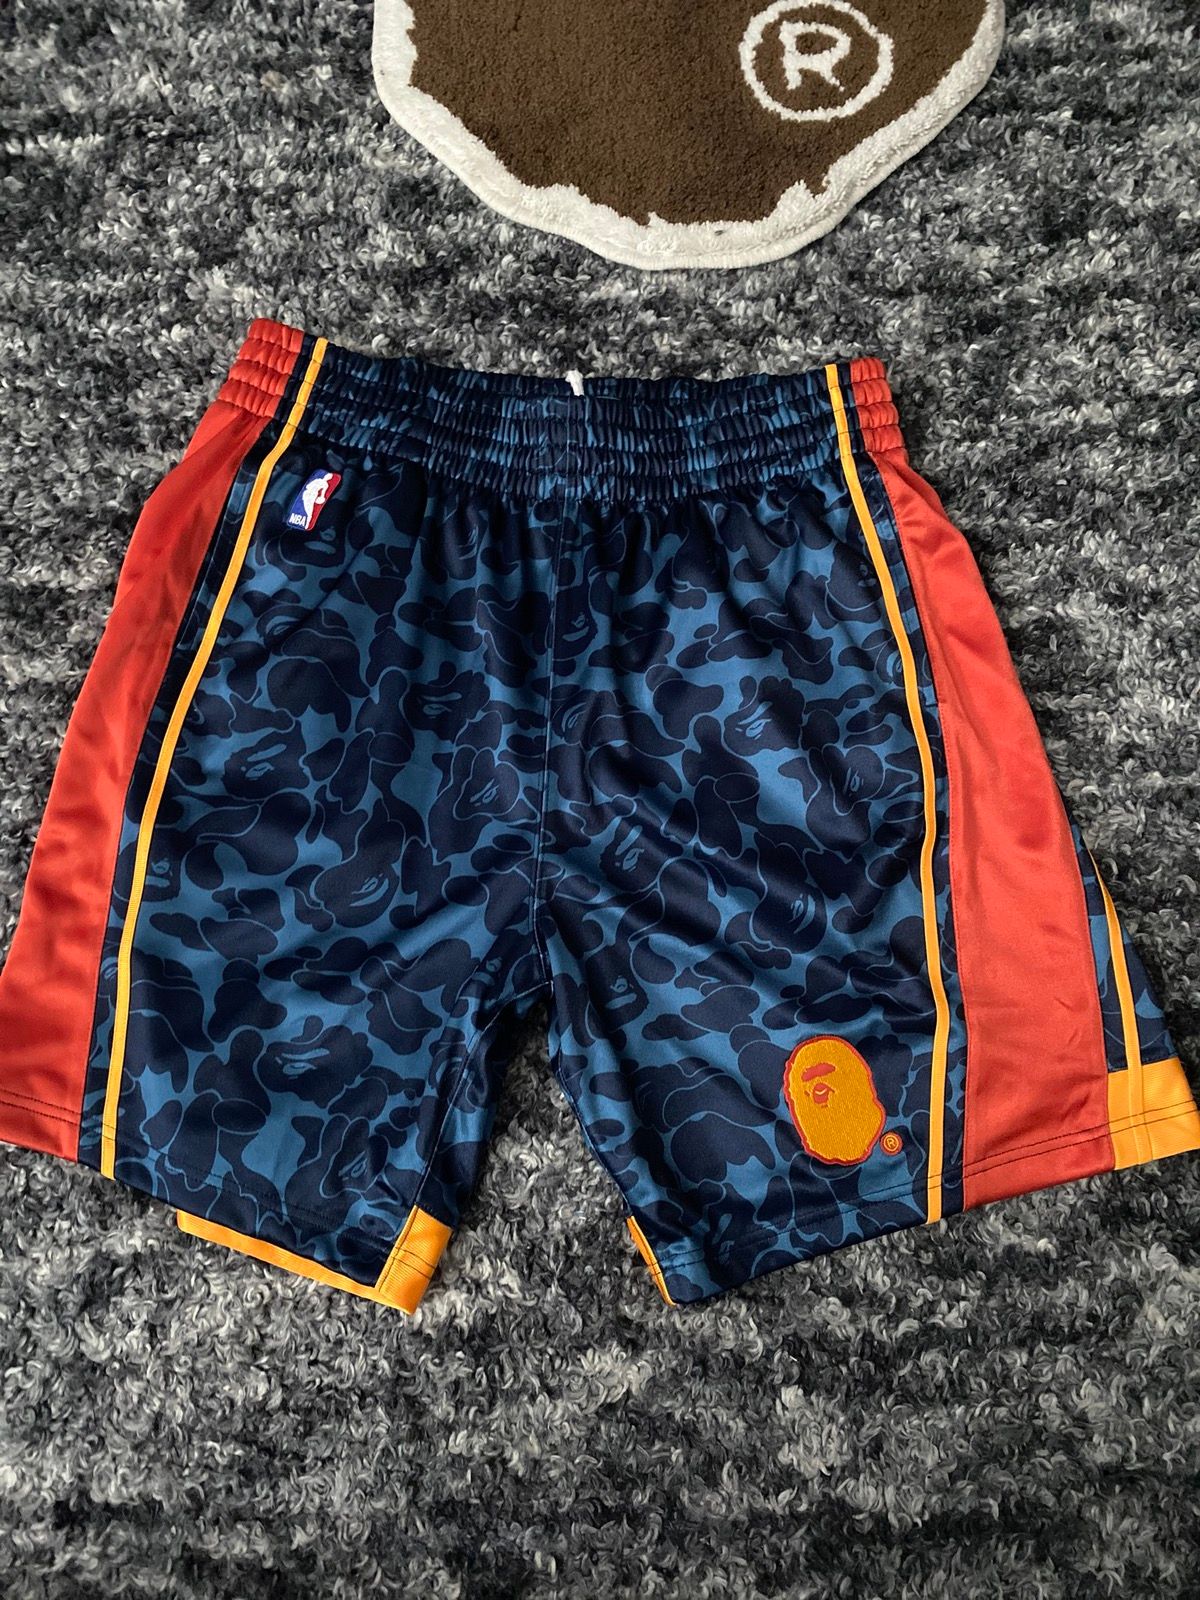 Bape Bape x Mitchell & Ness Warriors Authentic Basketball Shorts Size US 35 - 1 Preview